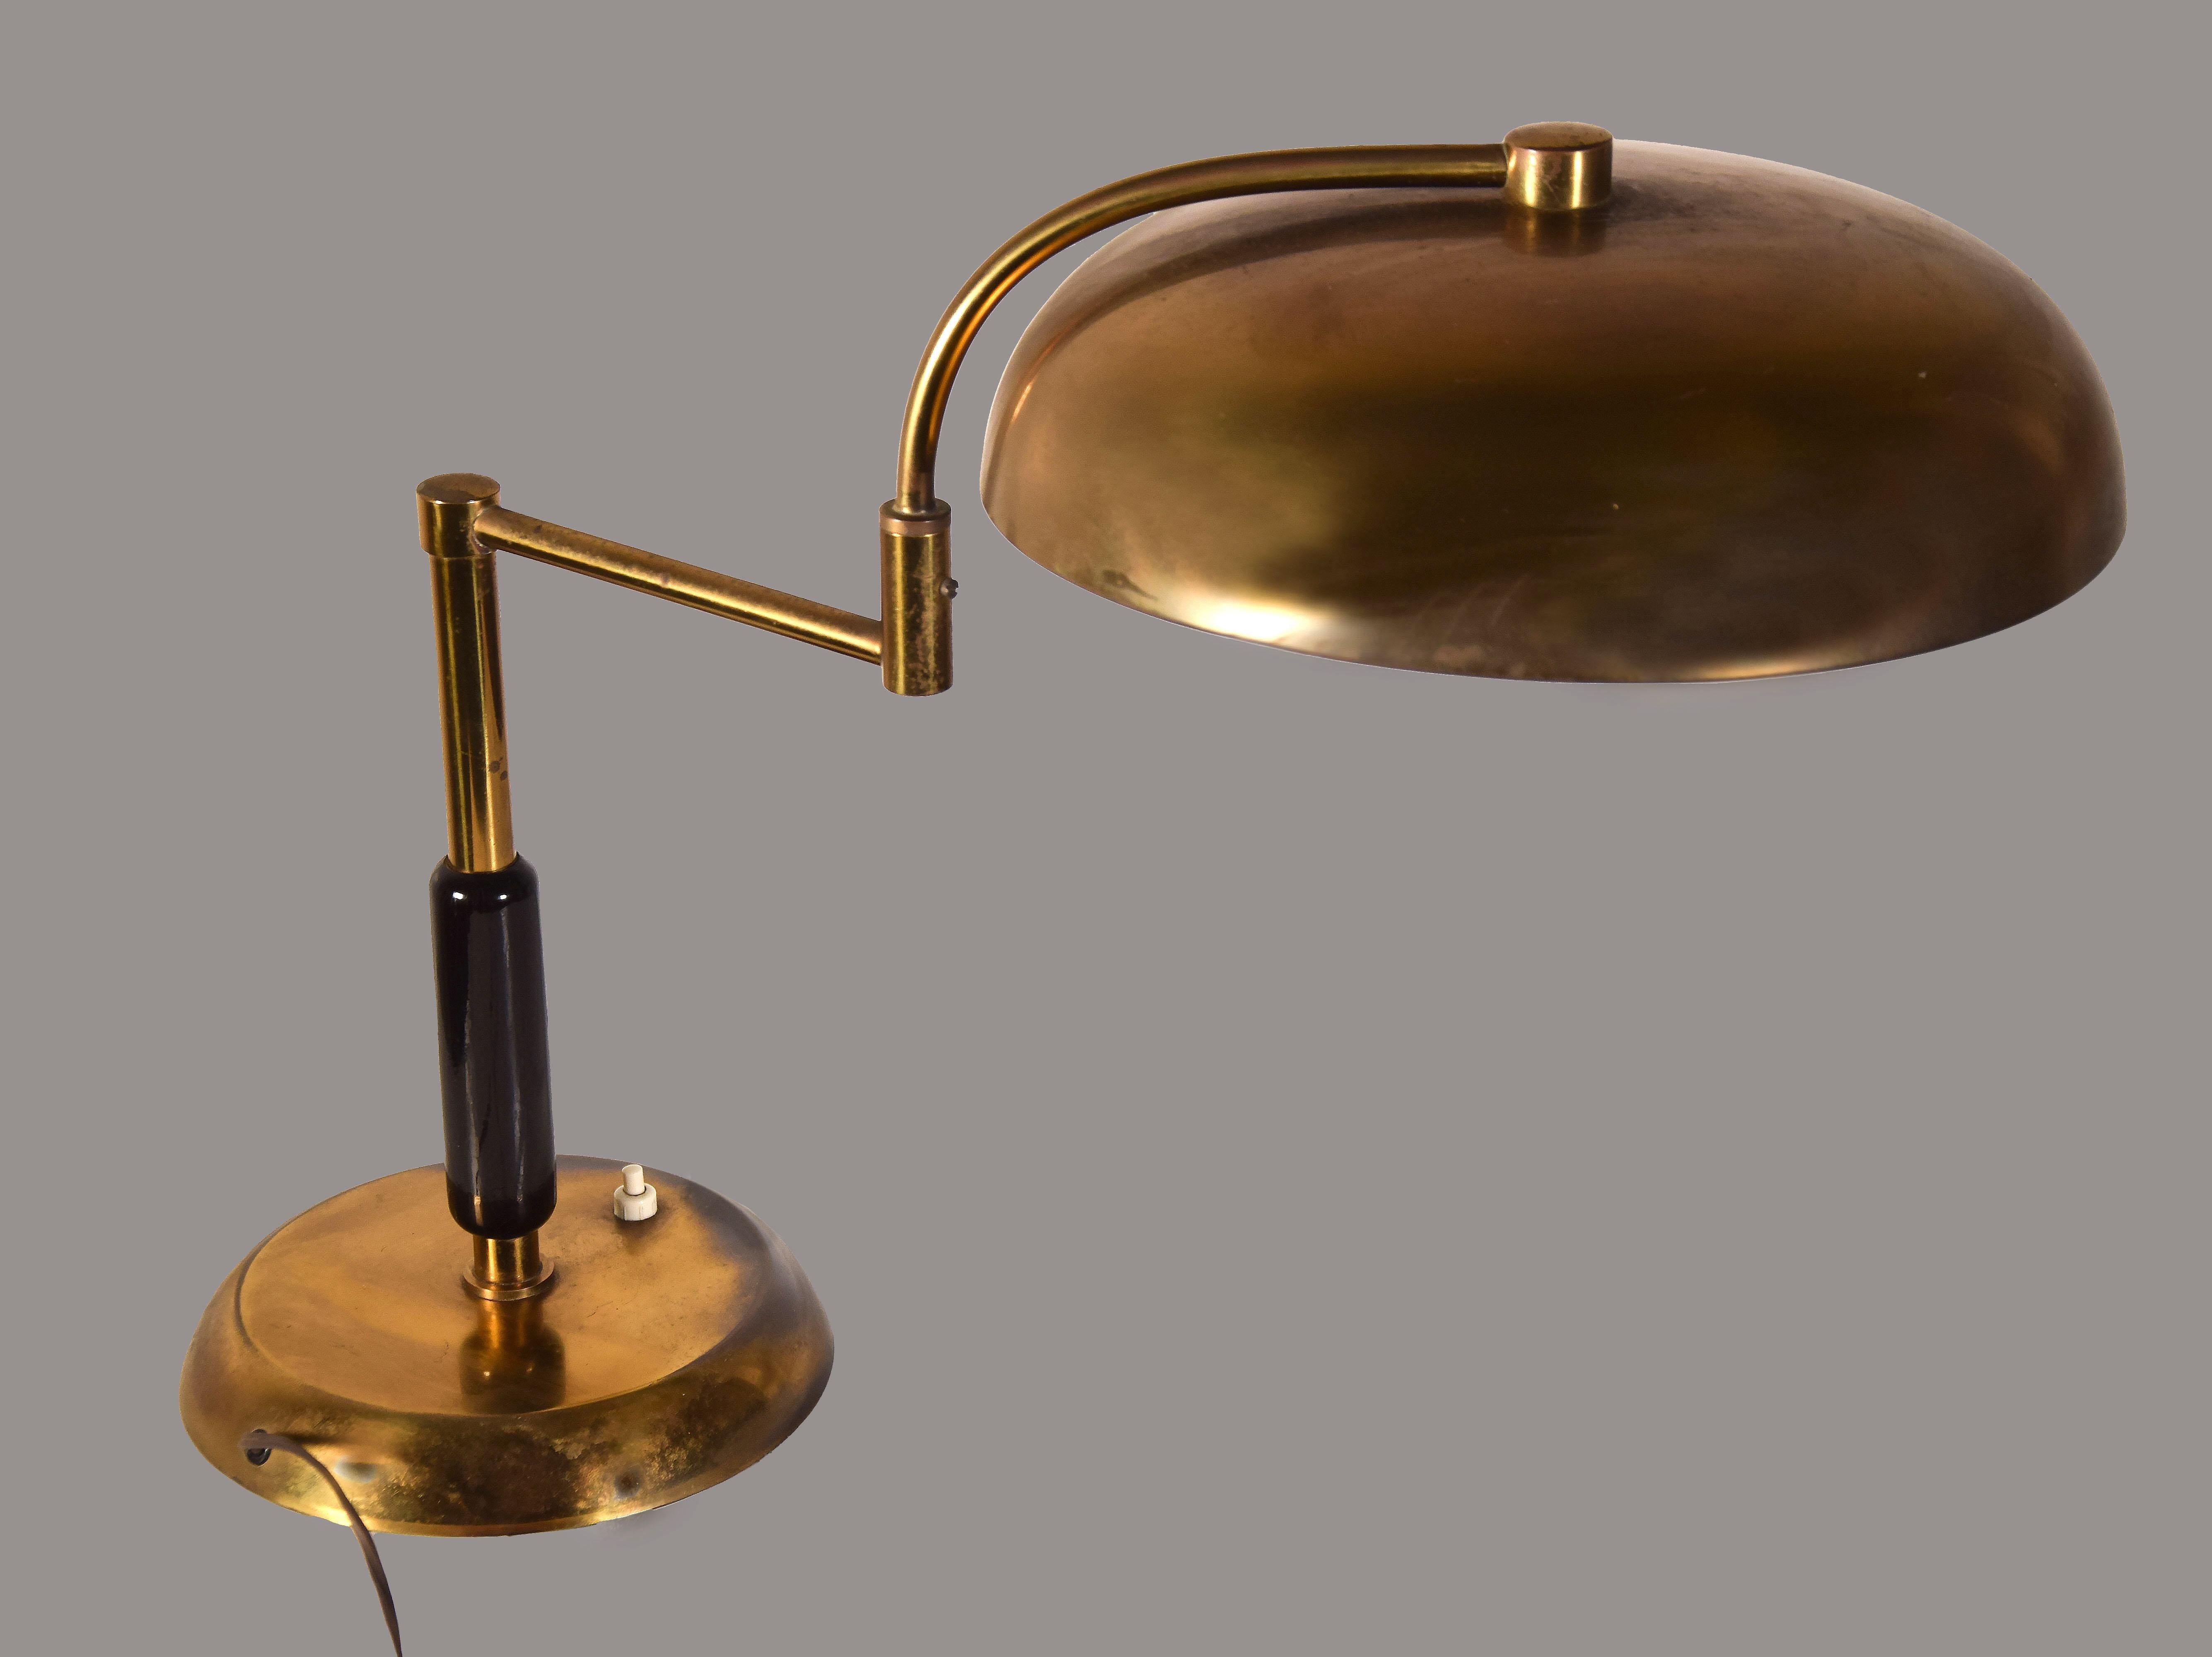 Vintage table lamp is a fashionable lamp realized in the 1950s by an Italian manufacturer.

A vintage brass table lamp, a reminder of the mid-century admirable decoration, ready to be collected! 

Dimensions: cm 30 x 40 x 30. 

Very good